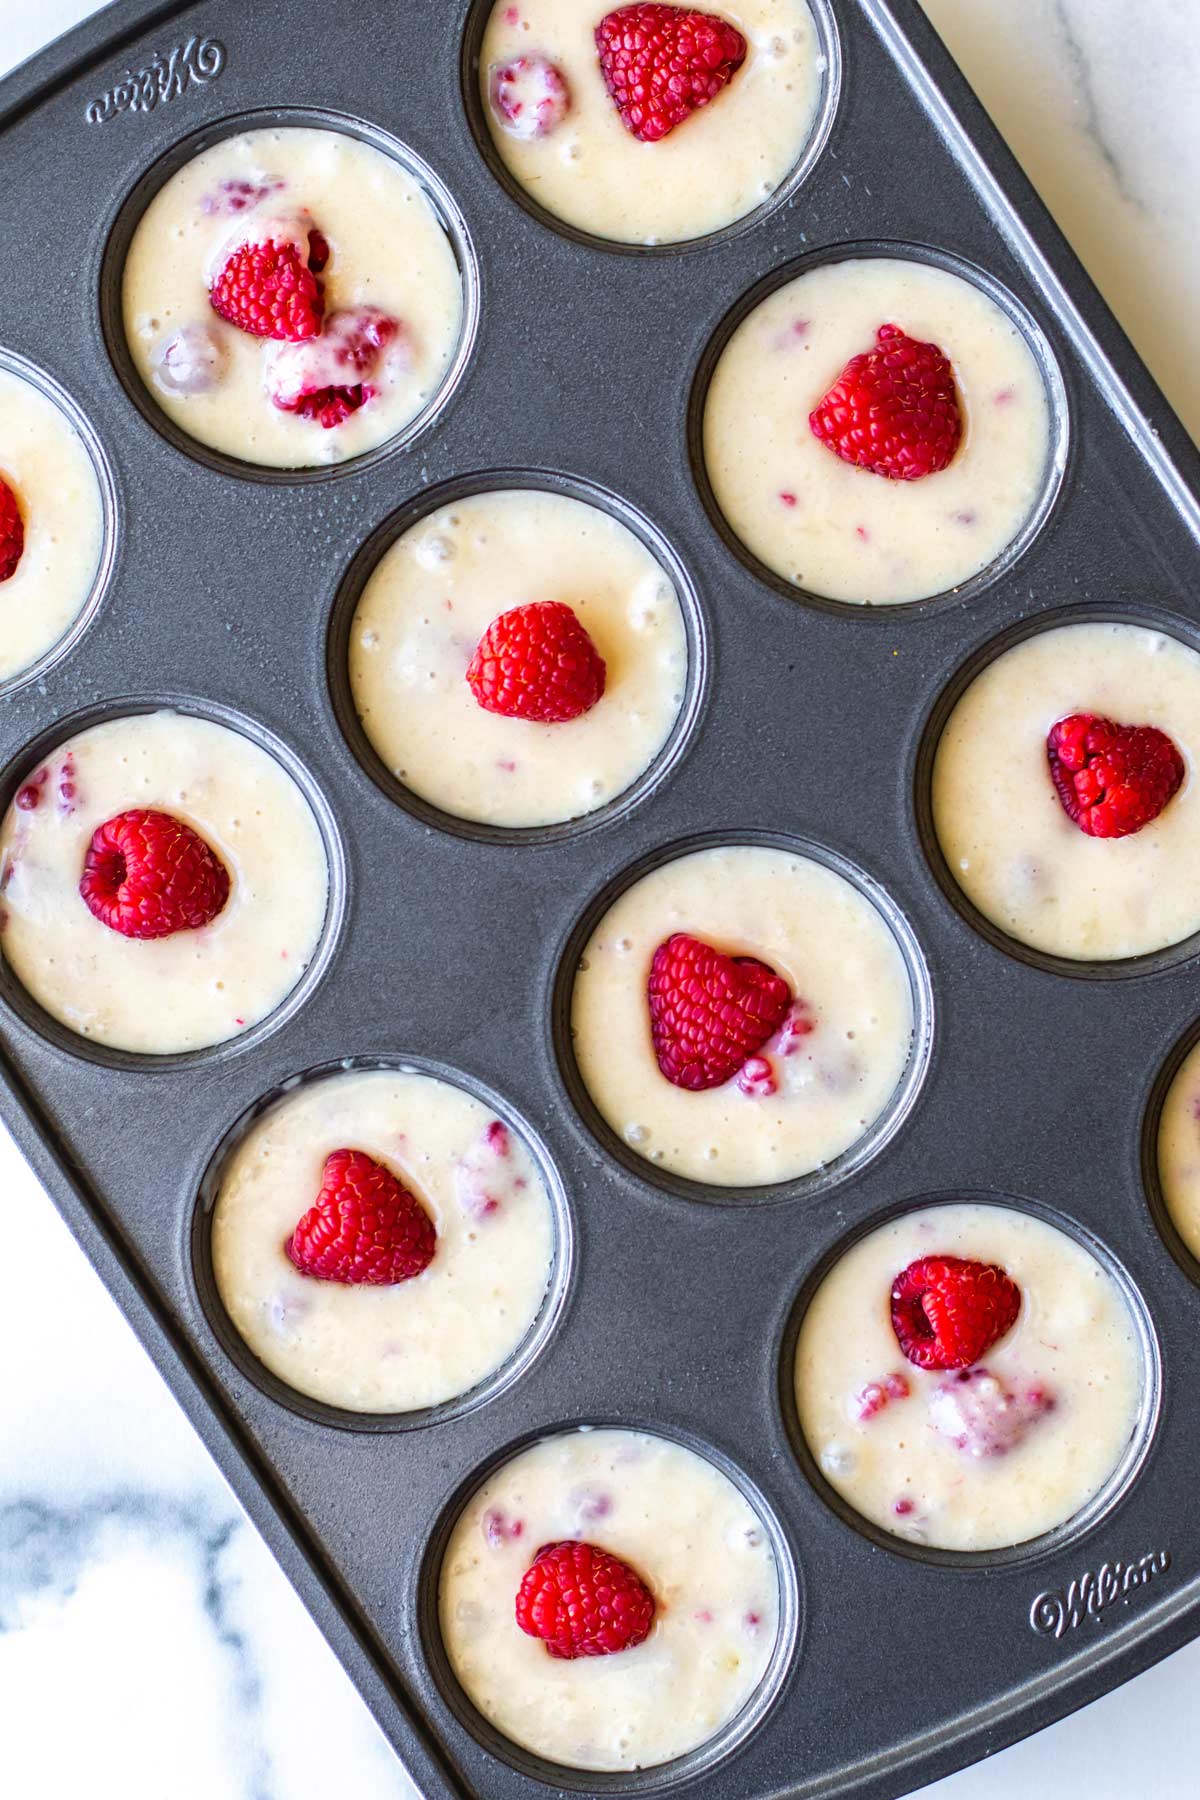 the batter in a pan and topped with raspberries.